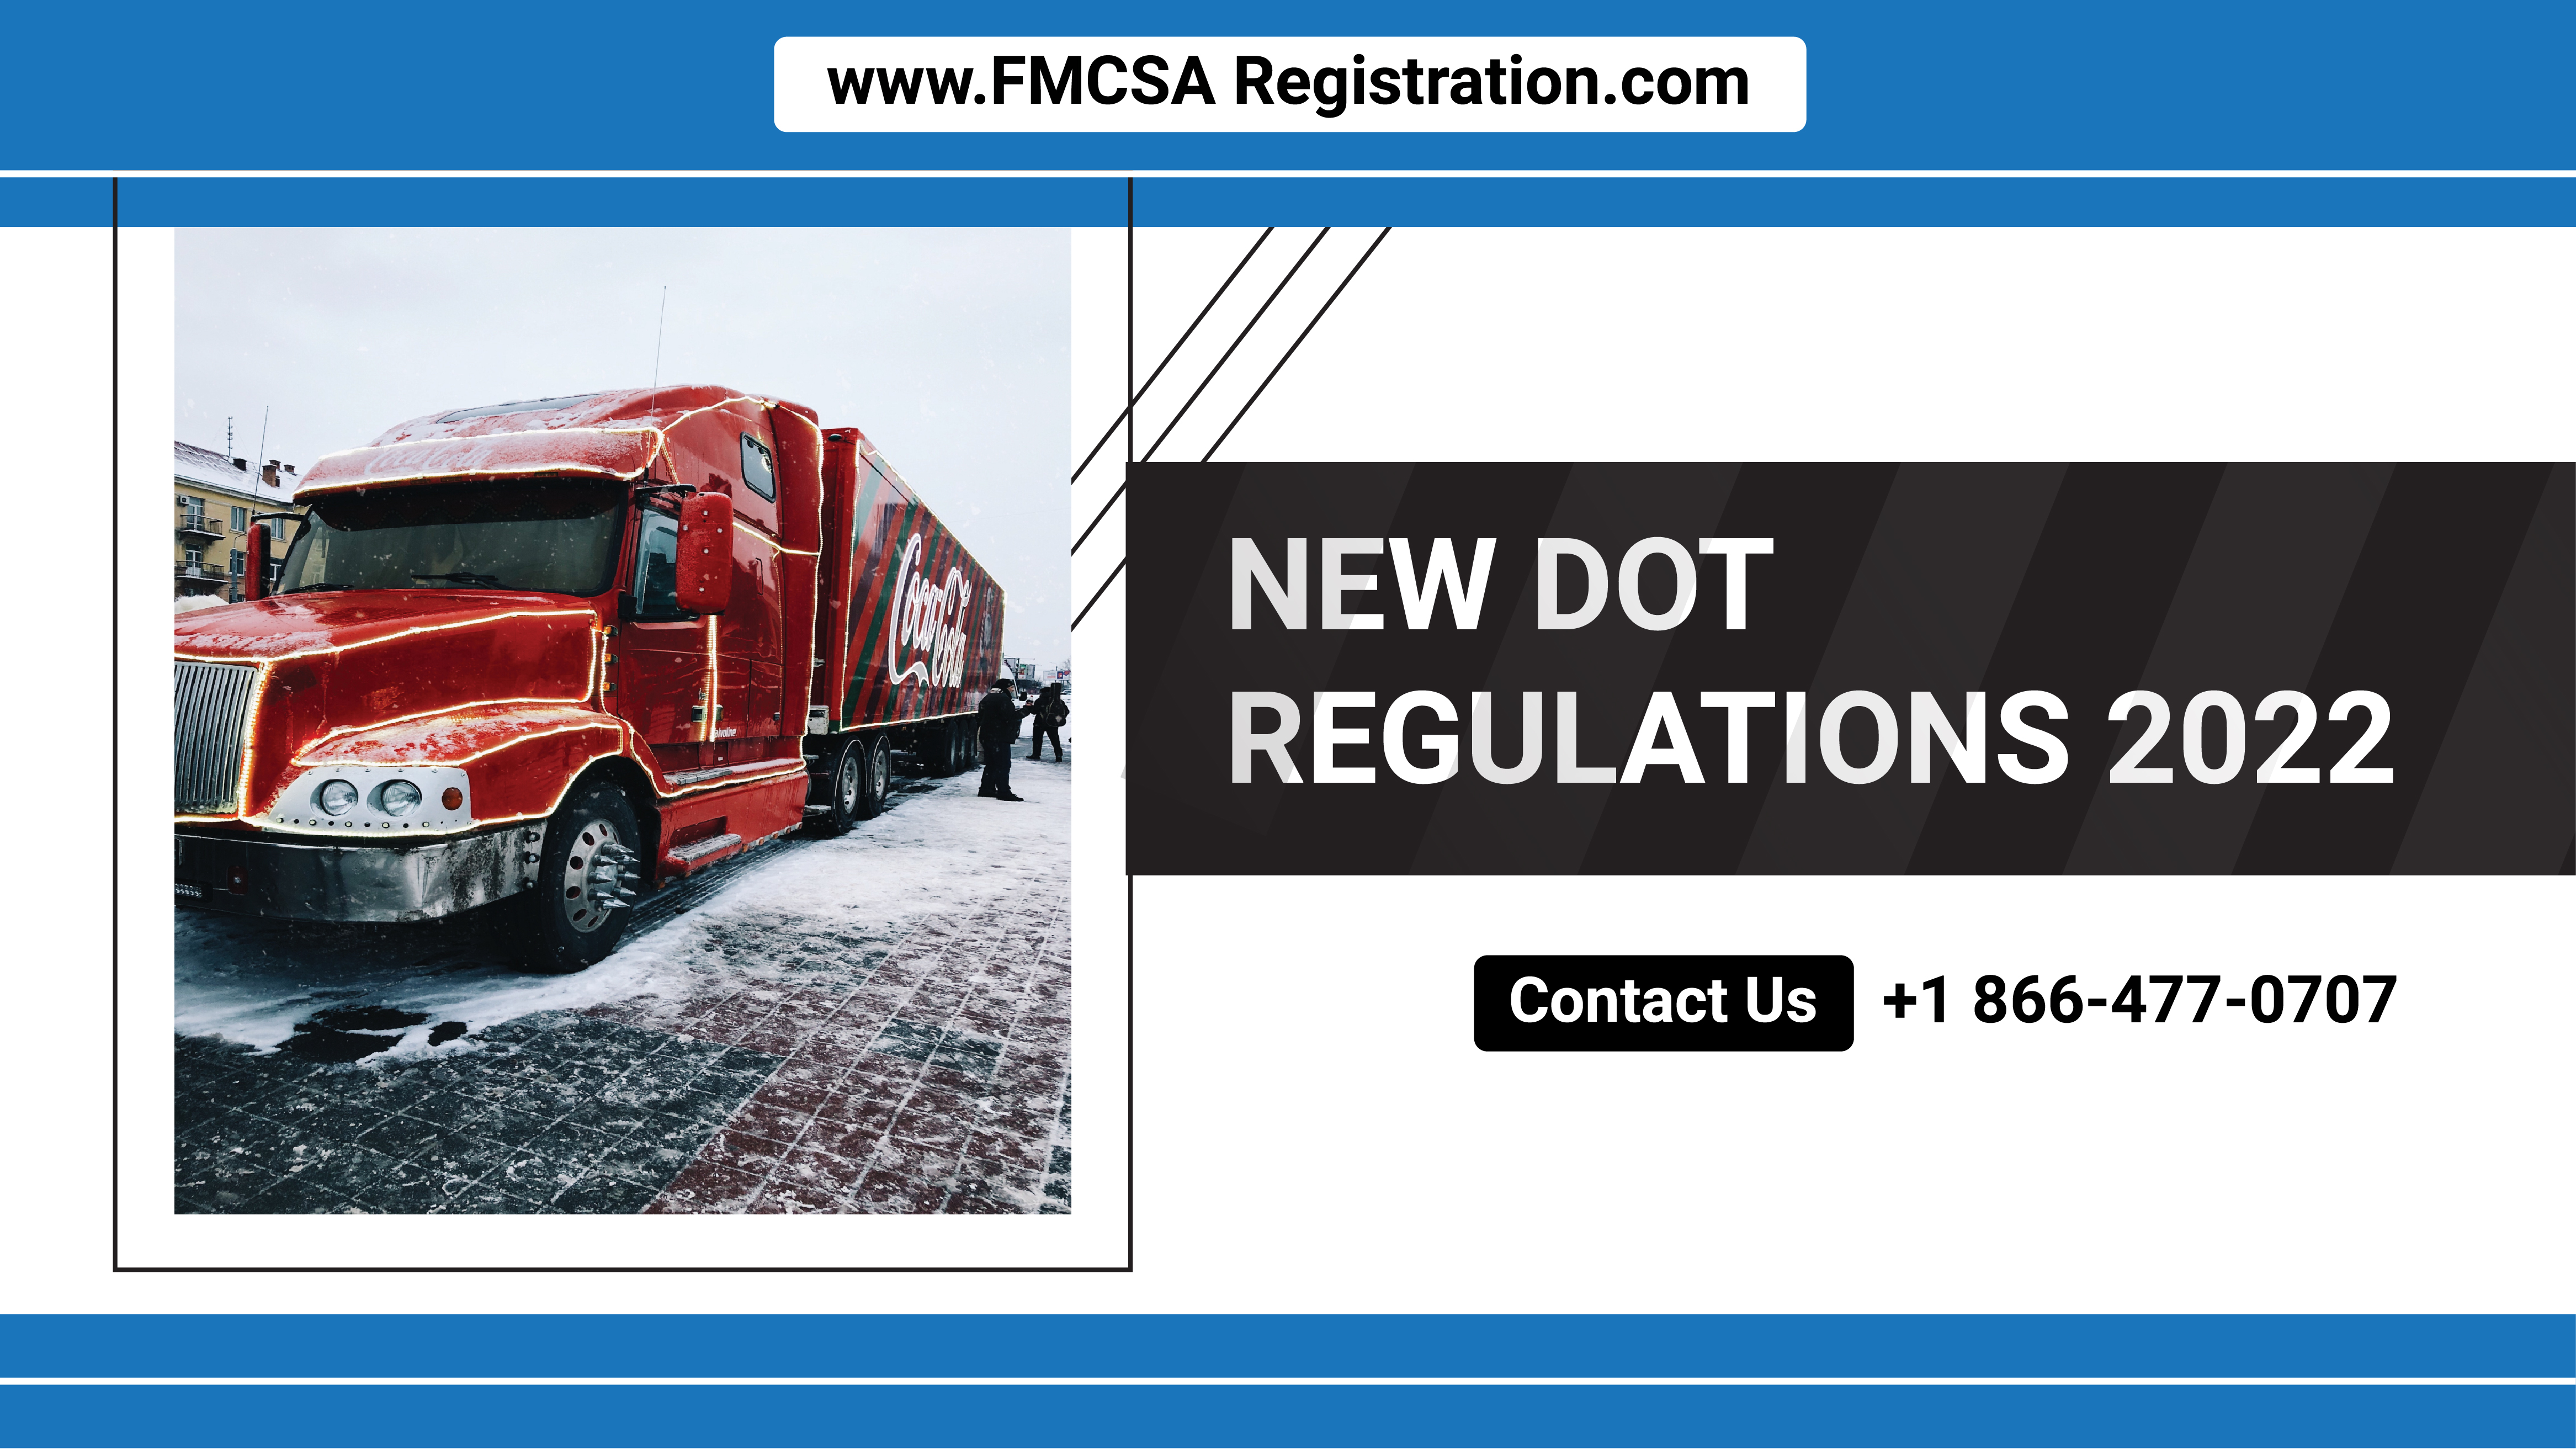 new dot regulations for fmcsa trucking of highways across the united states of America 